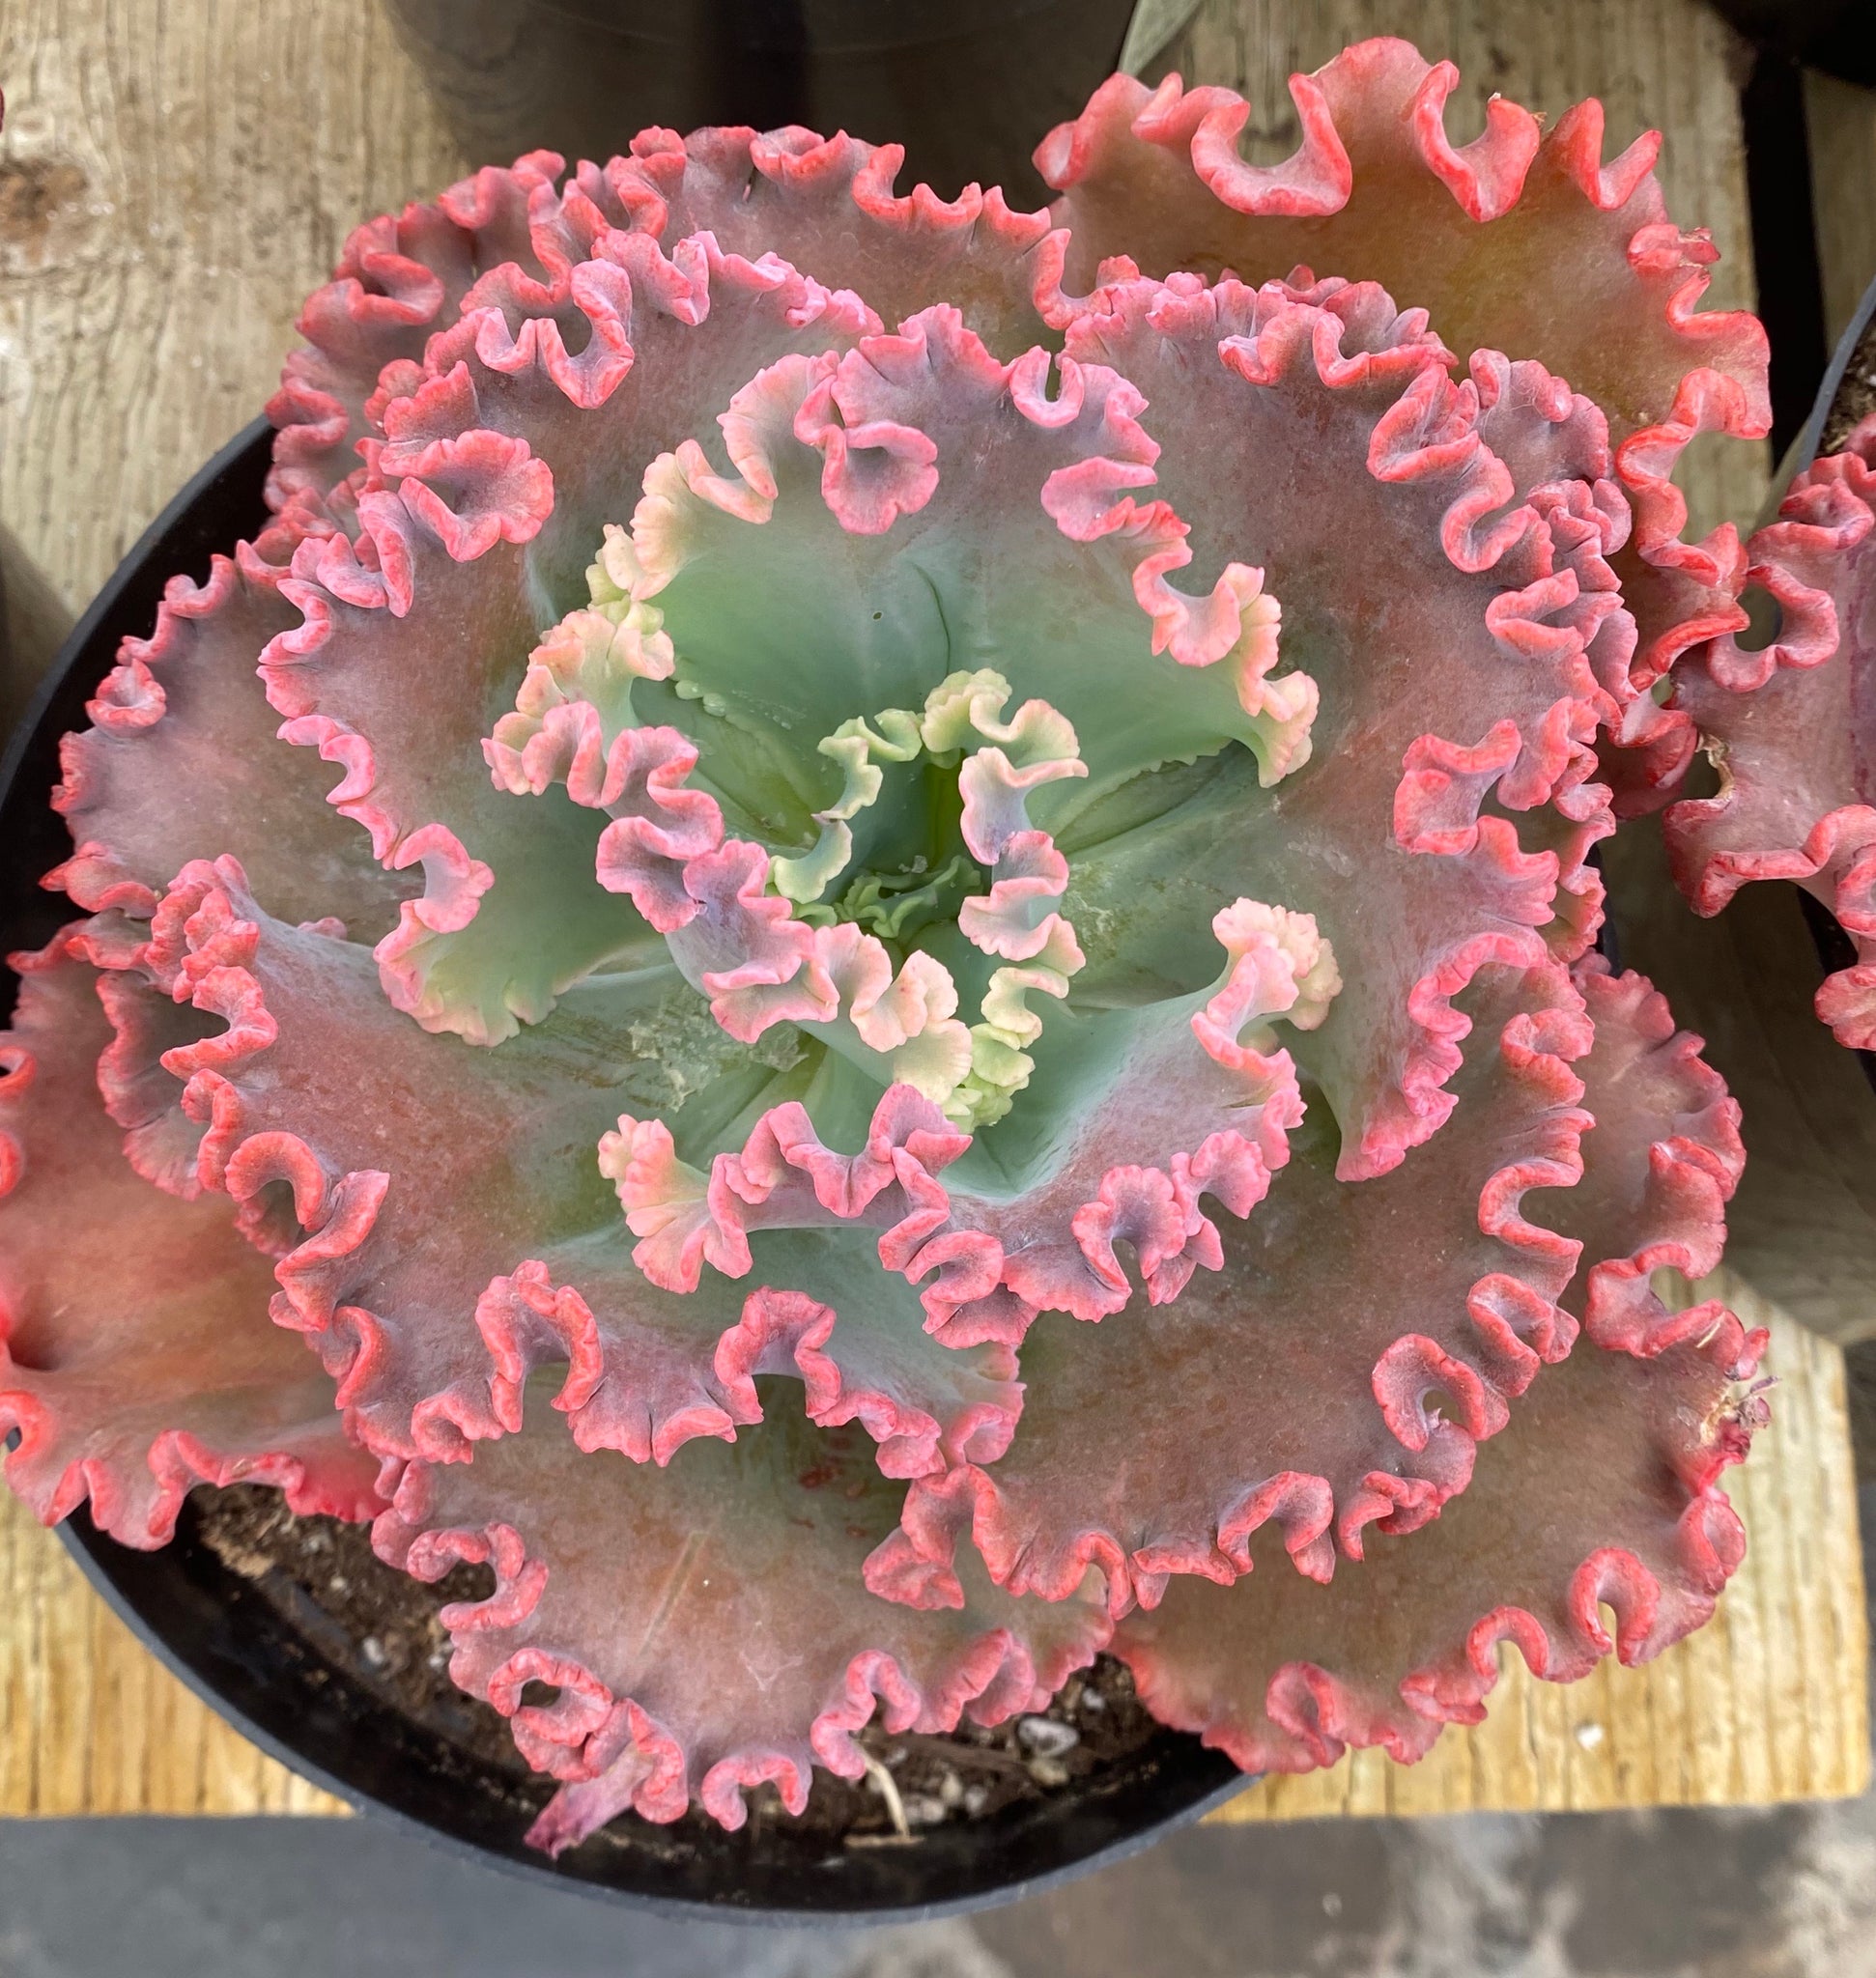 Echeveria Gorgon's Grotto from my personal collection. So